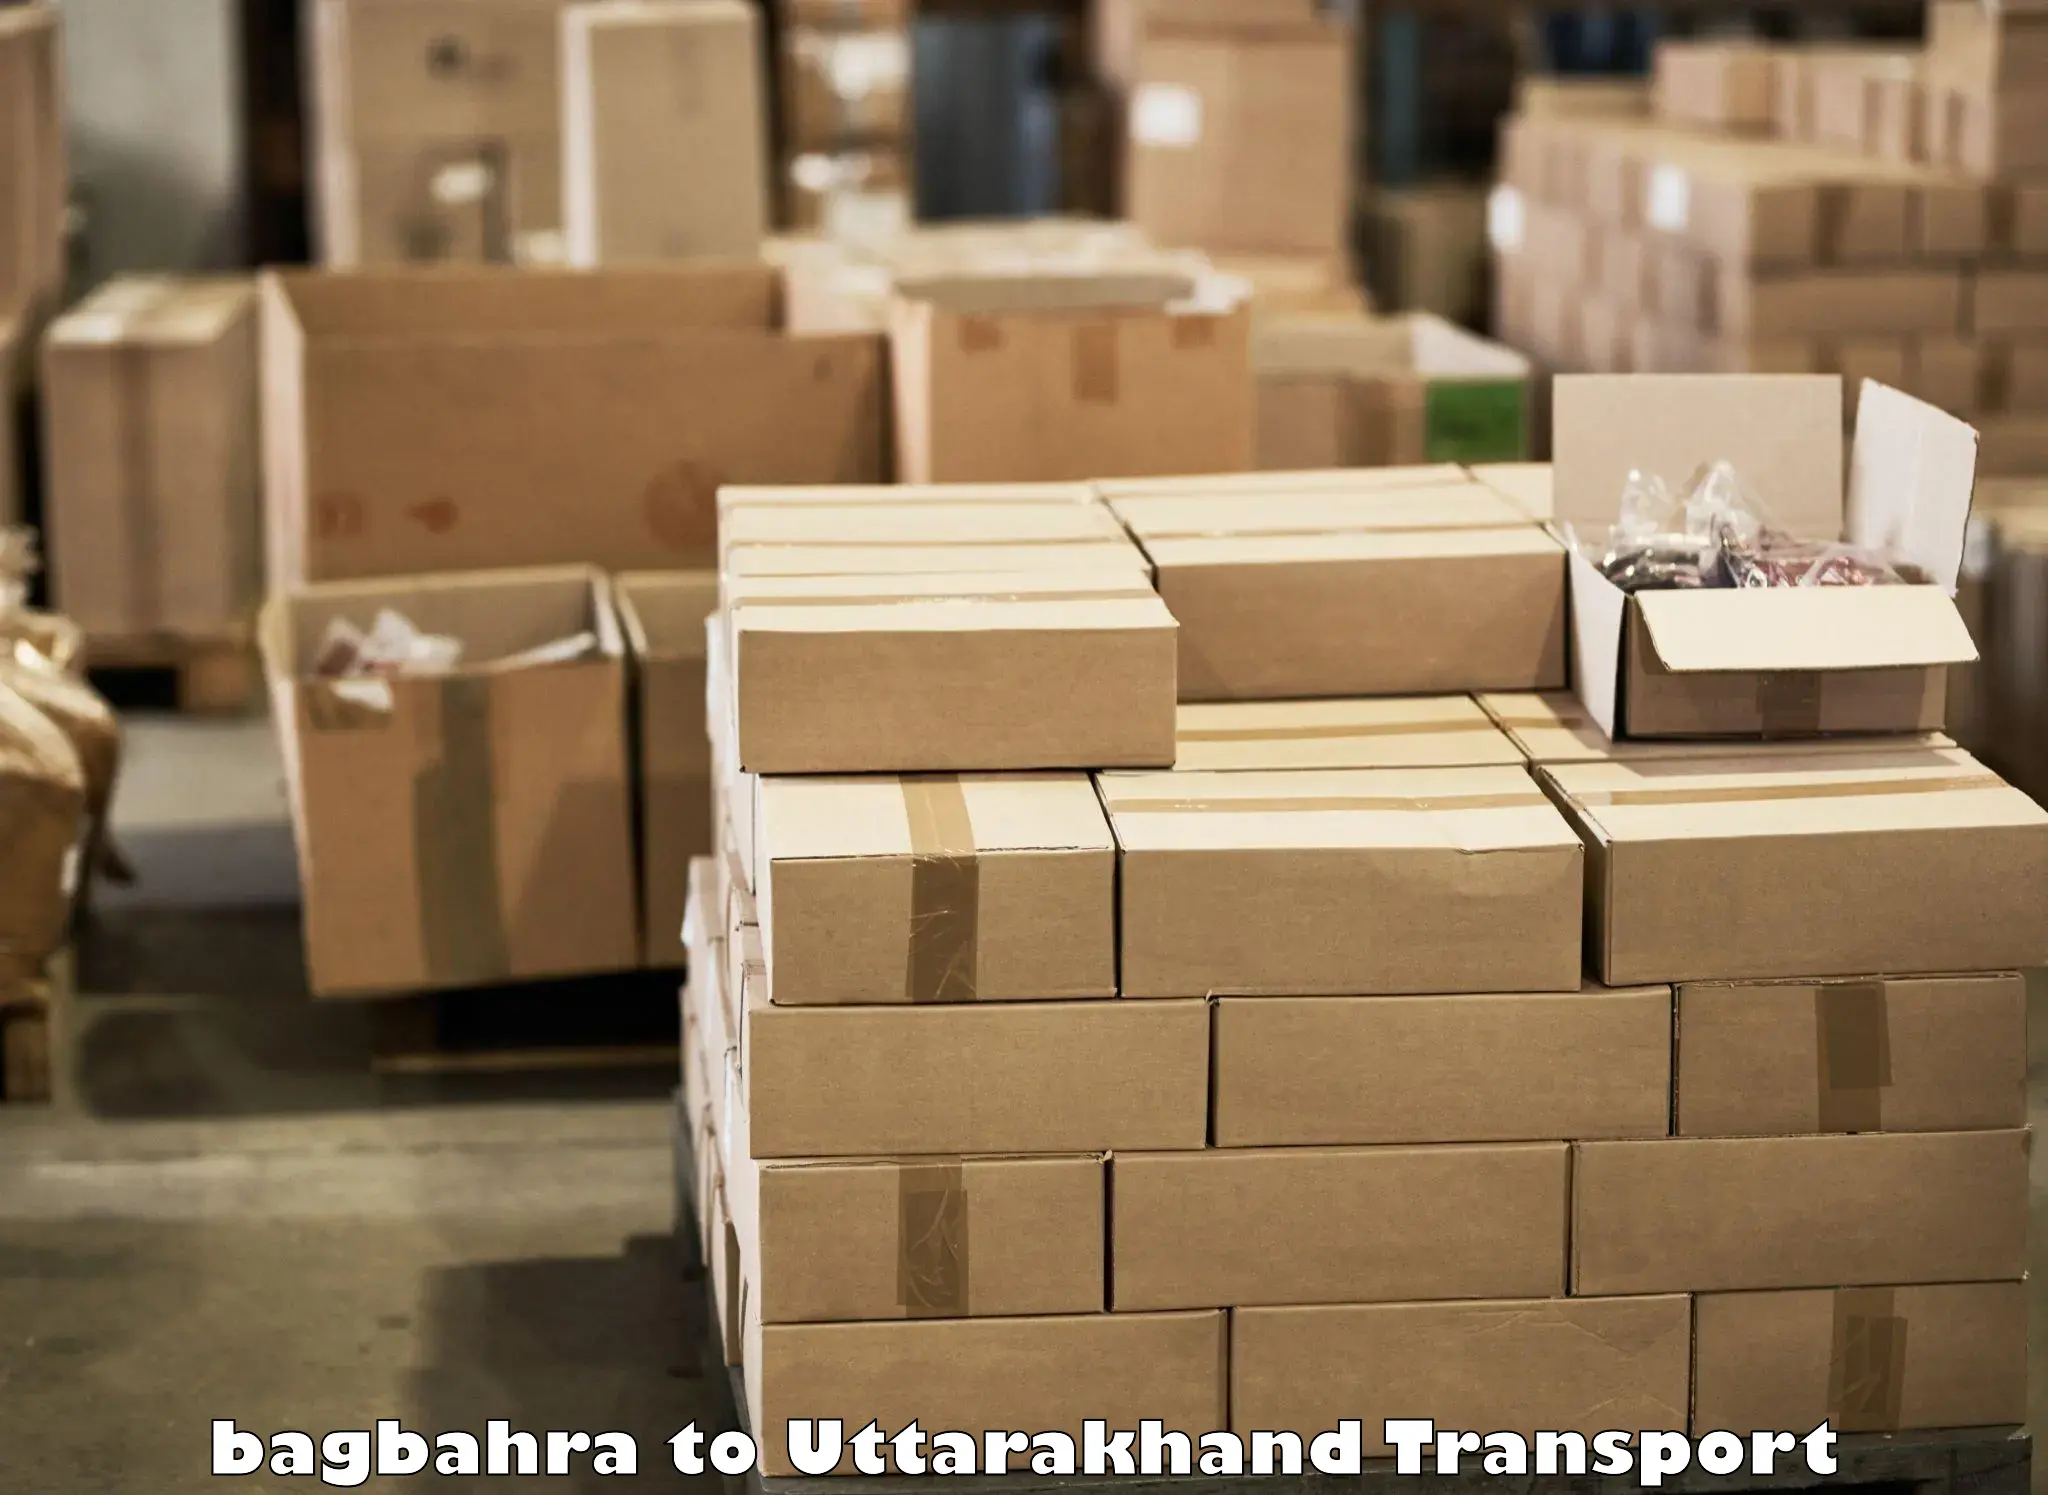 Commercial transport service bagbahra to Rudraprayag